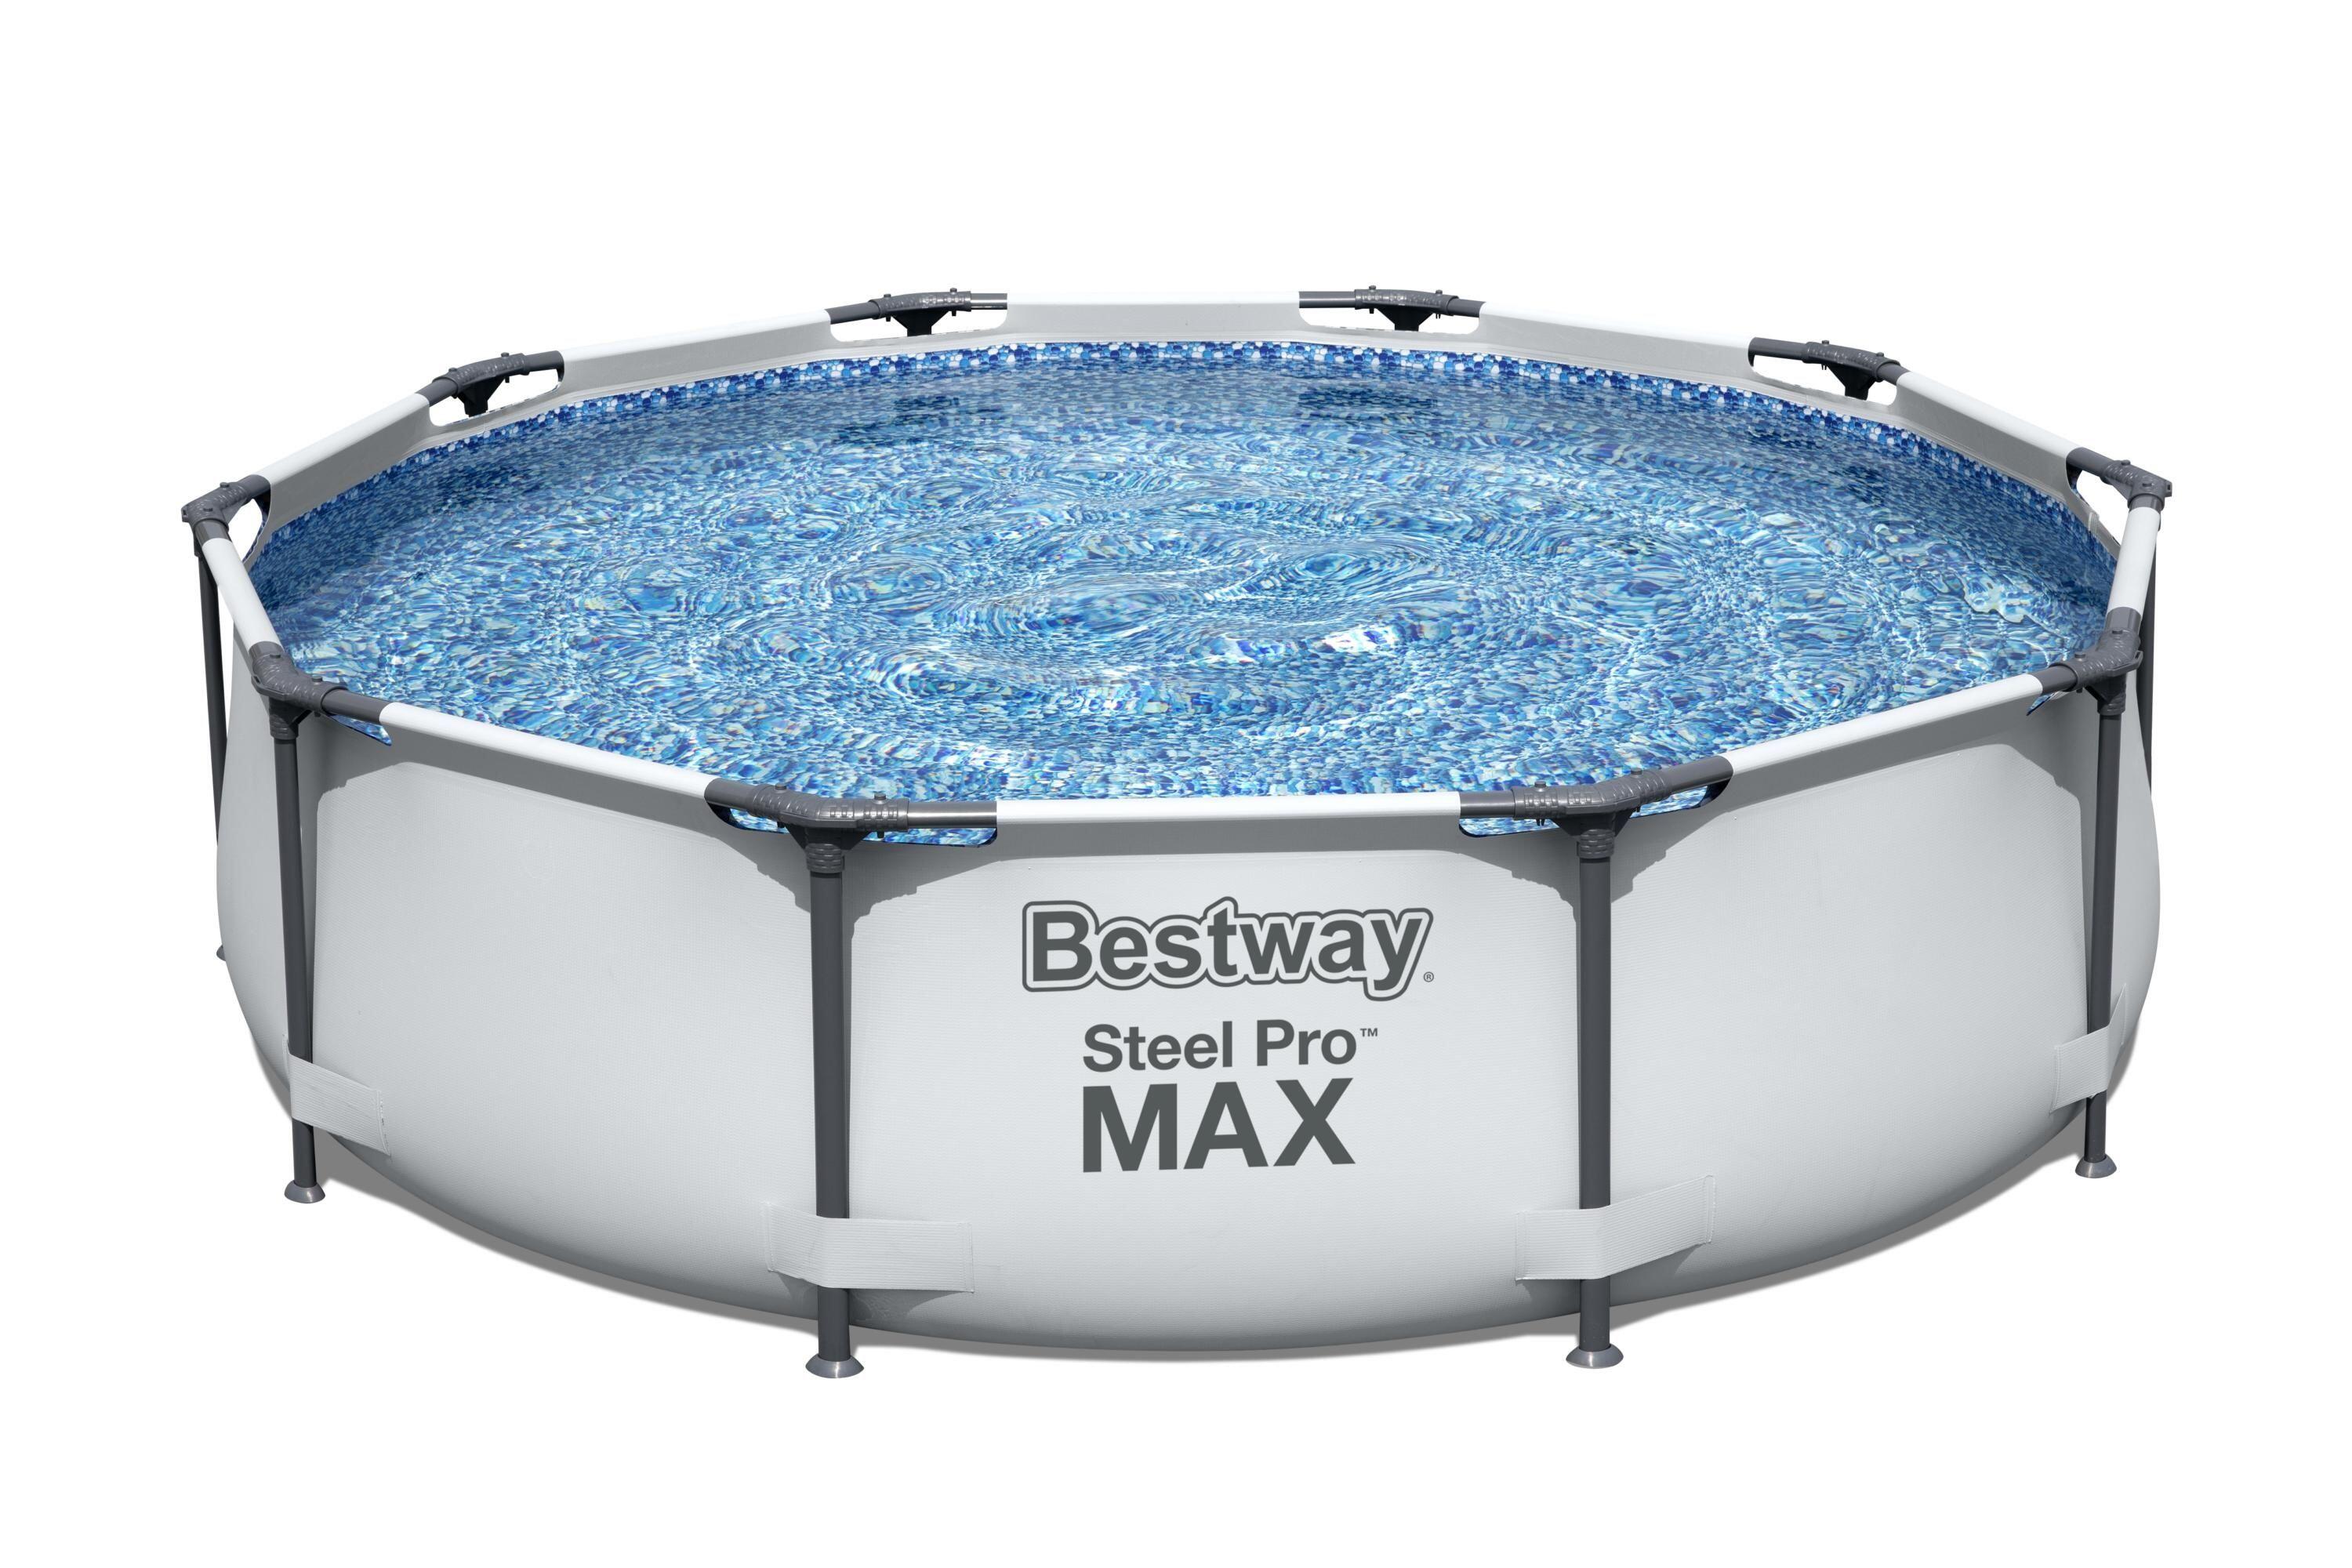 Bestway Steel Pro MAX Framed Above Ground Swimming Pool, 10ft x 30" - Grey 1/5